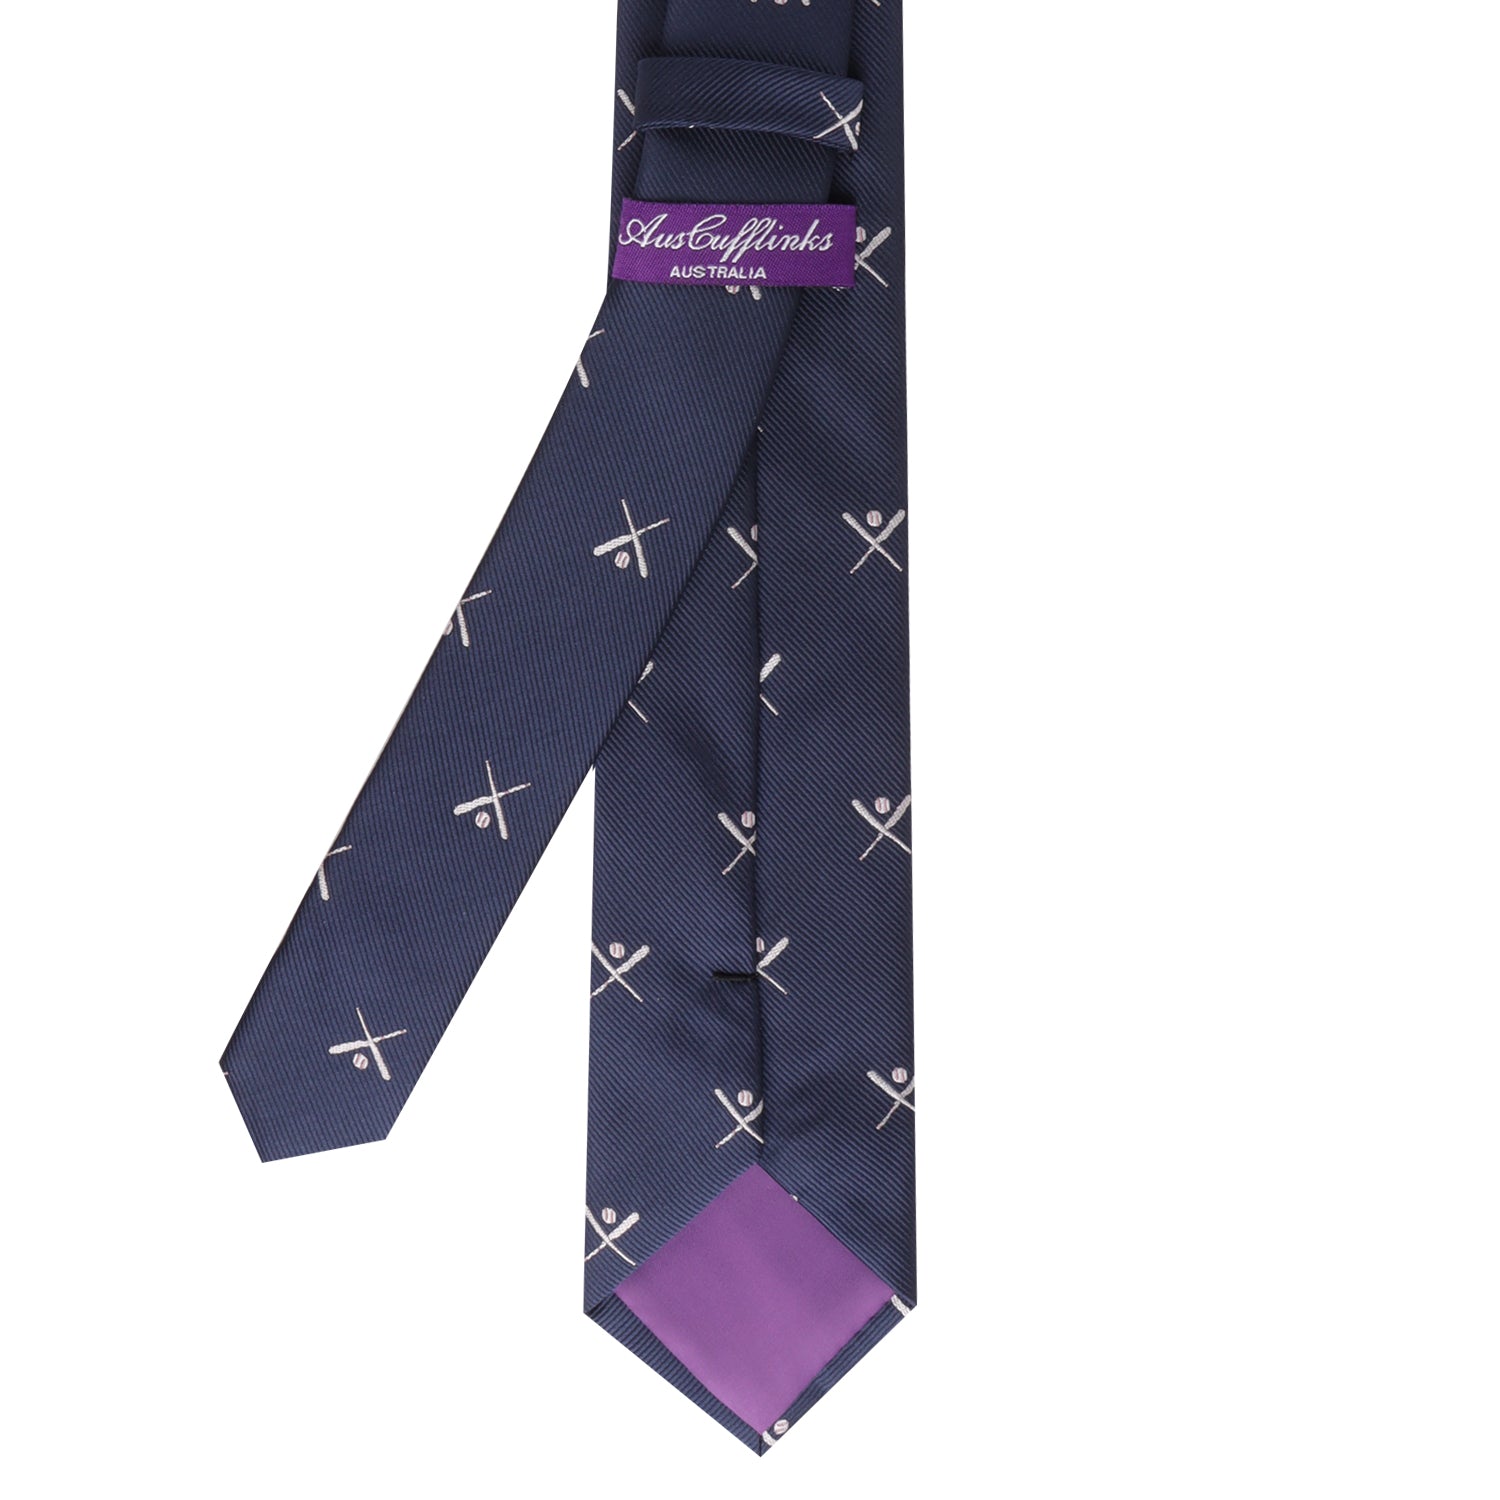 A Crossed Baseball Skinny Tie with an elegant cross design, perfect for any special occasion.